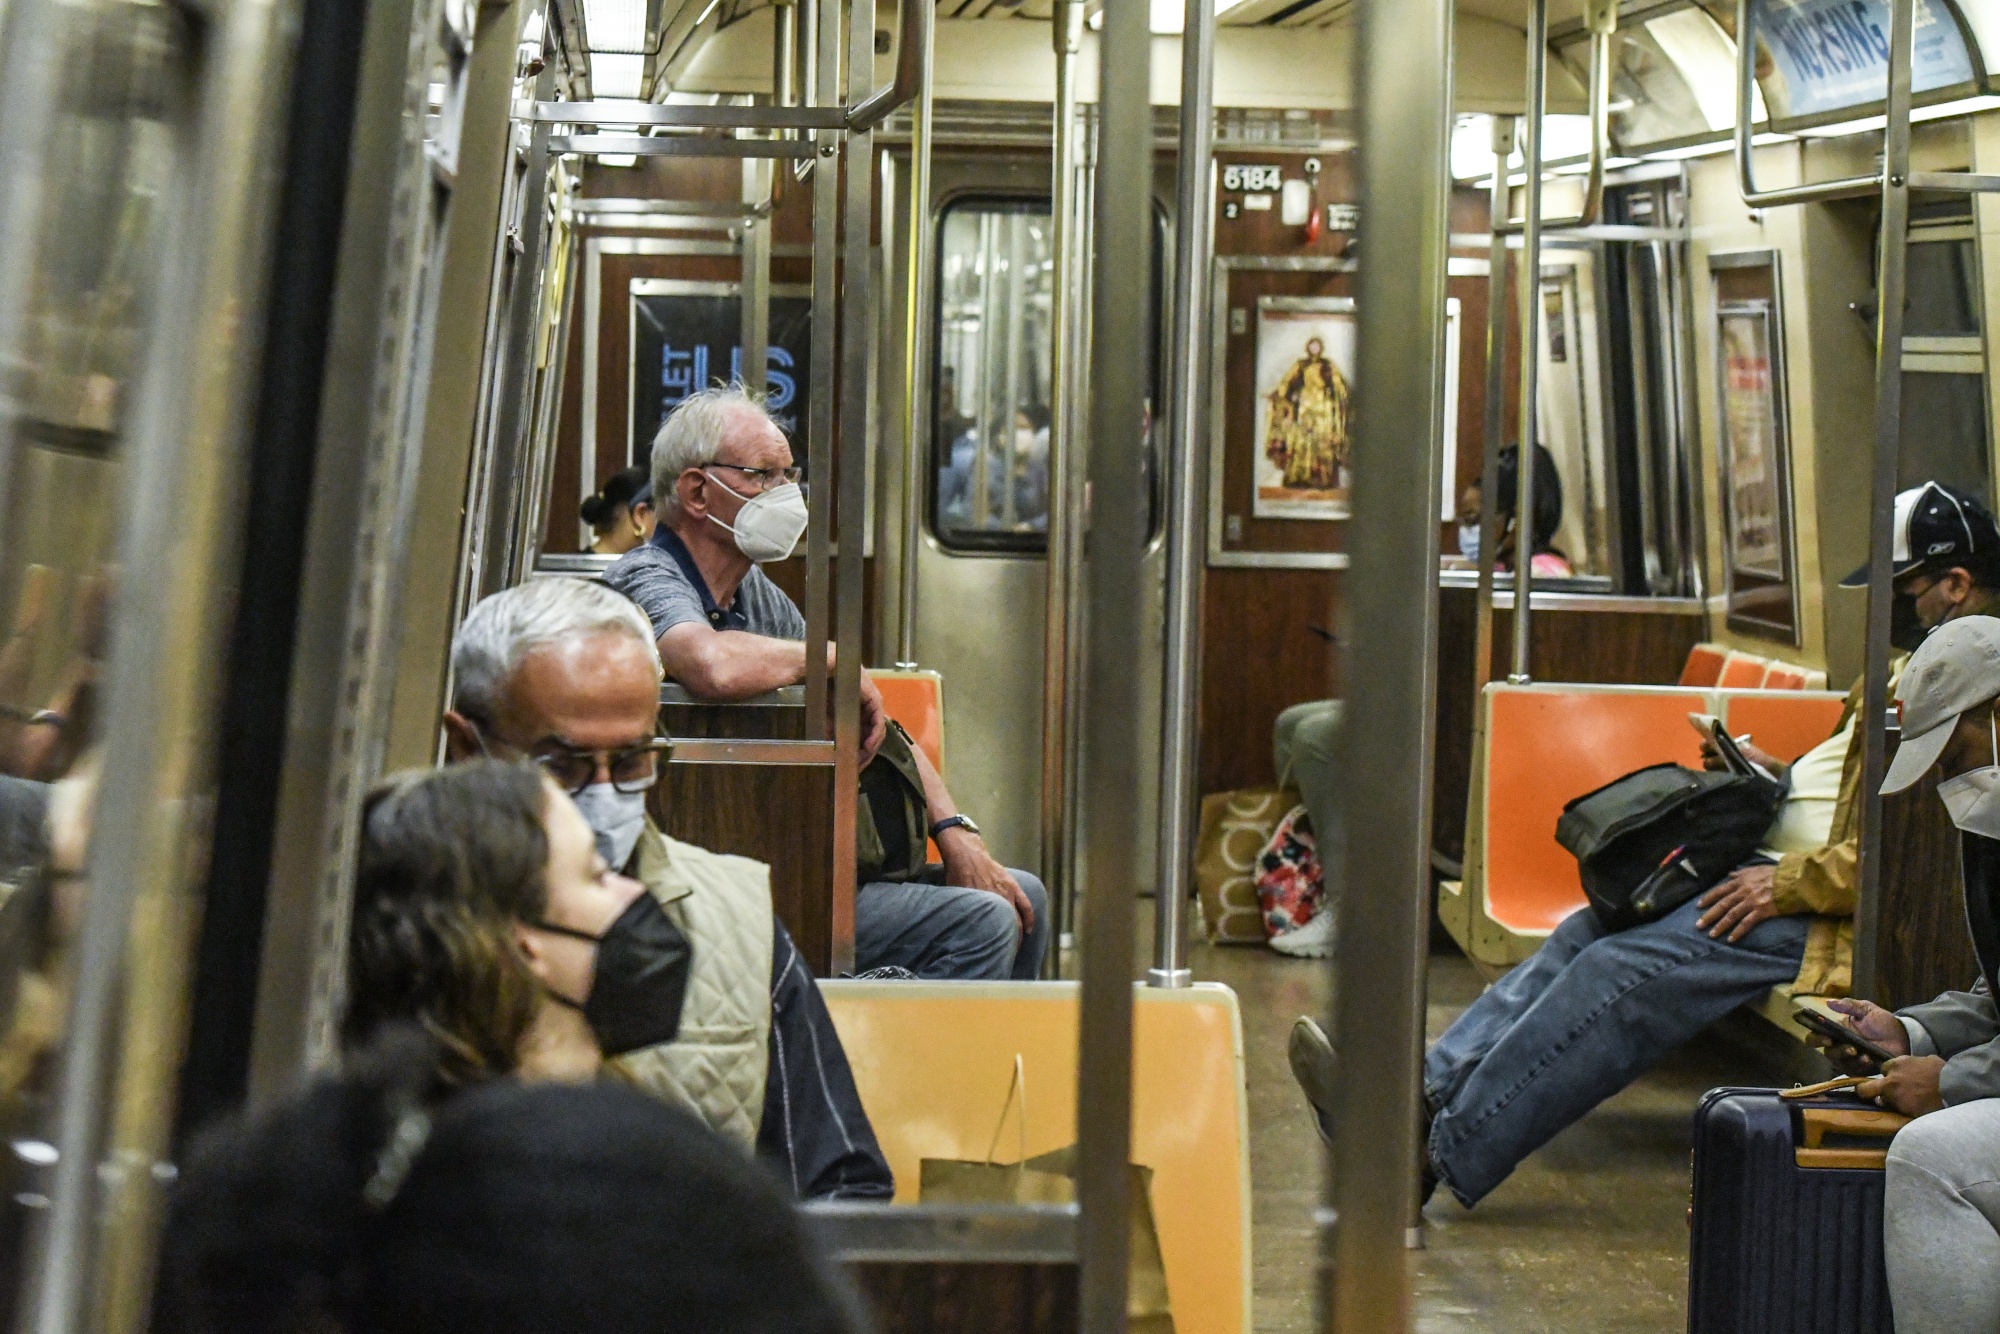 New Yorks Subways Have Less Crime But More Violence